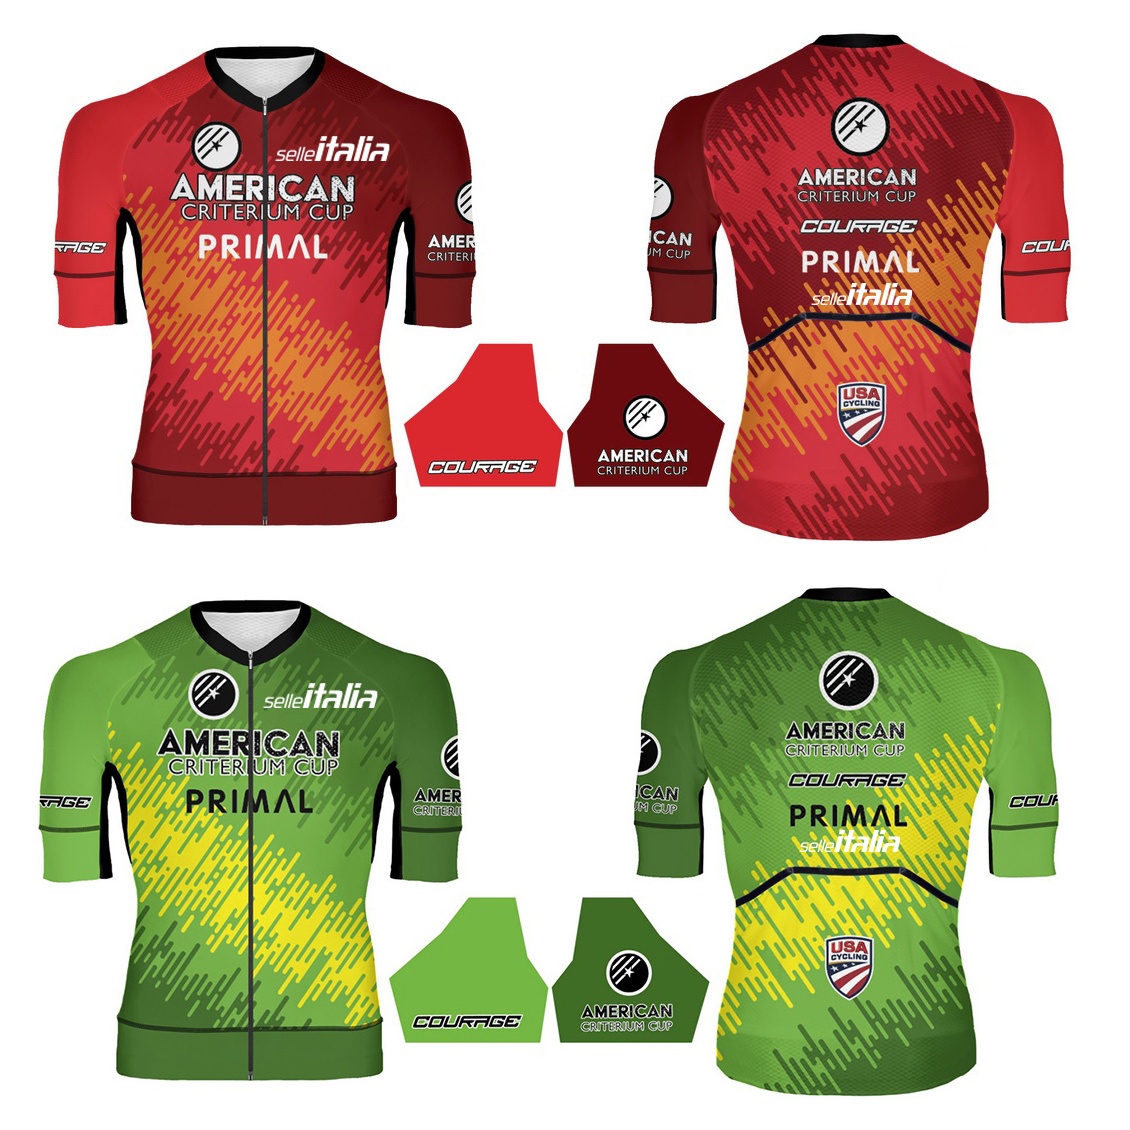 Selle Italia and Primal Wear team up to provide leader jerseys for